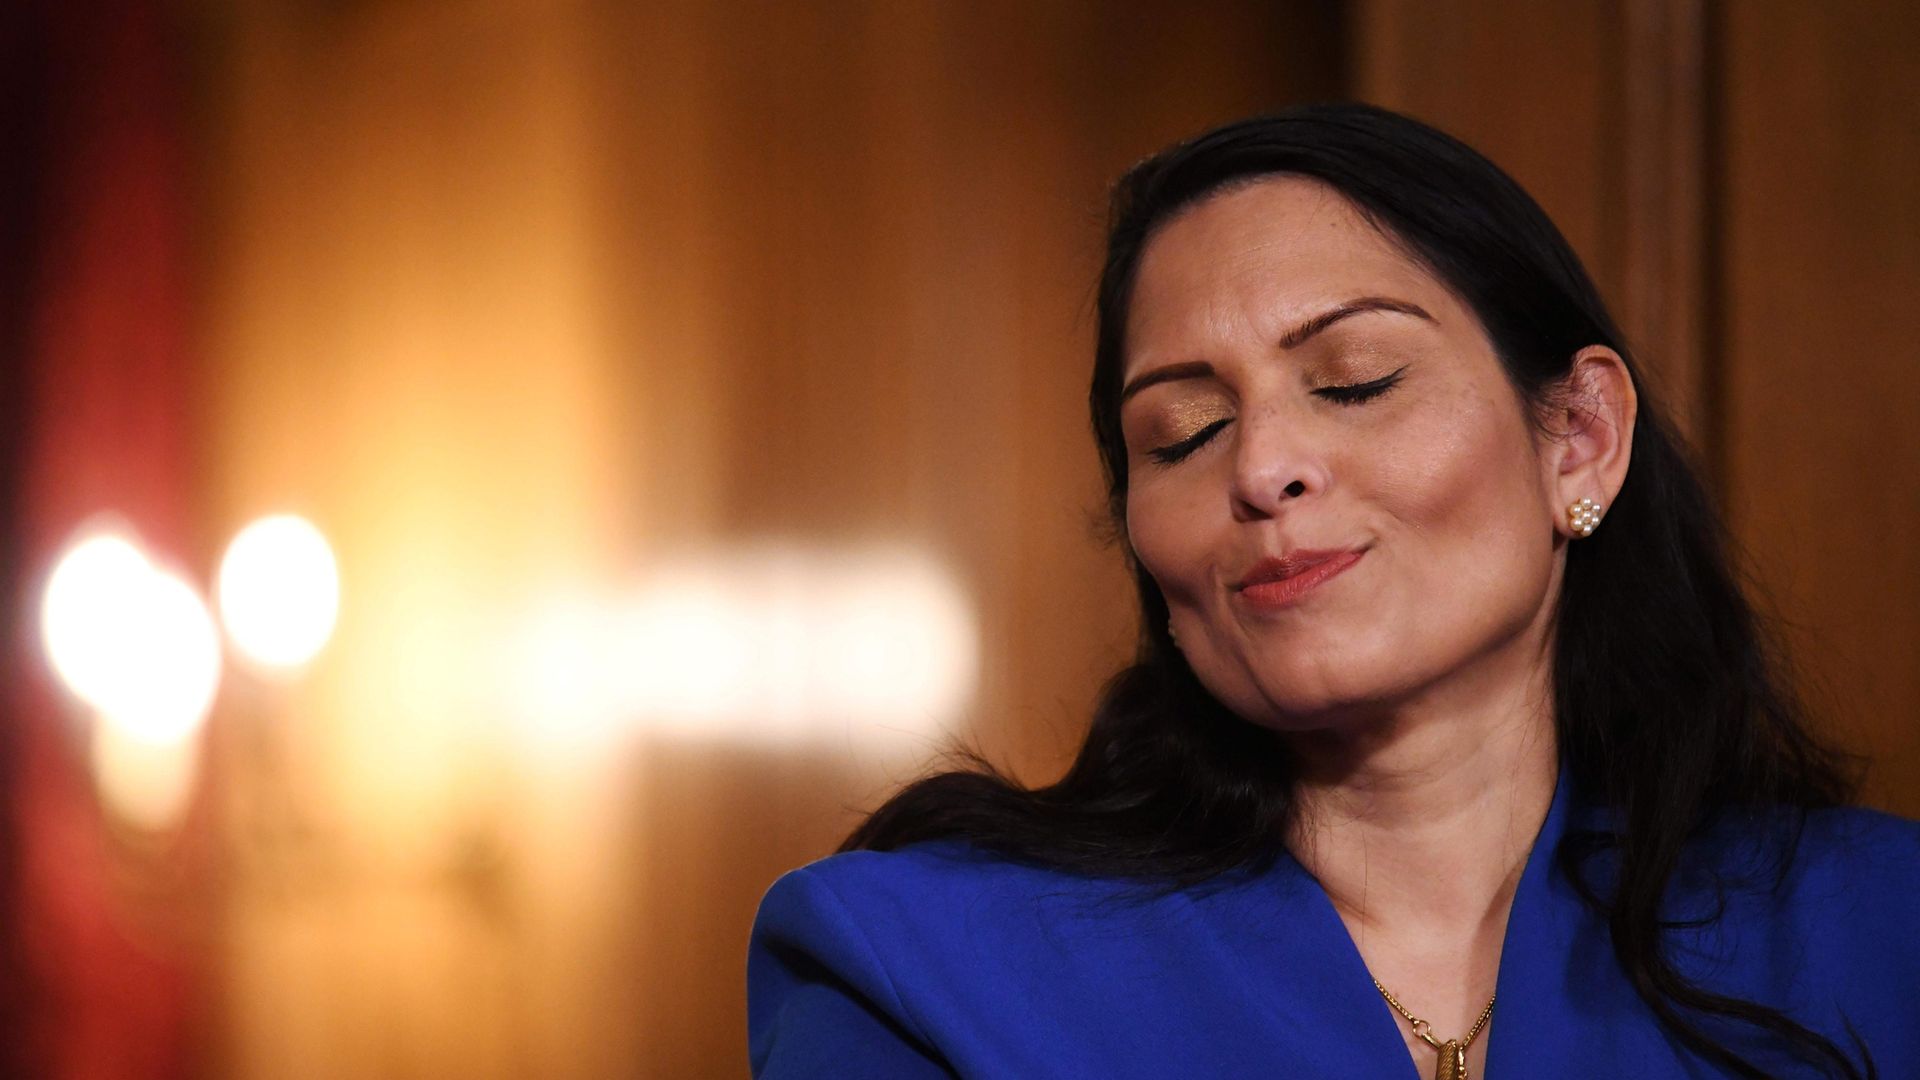 Former home secretary Priti Patel at a Covid briefing in January 2021. Photo: POOL/AFP via Getty Images